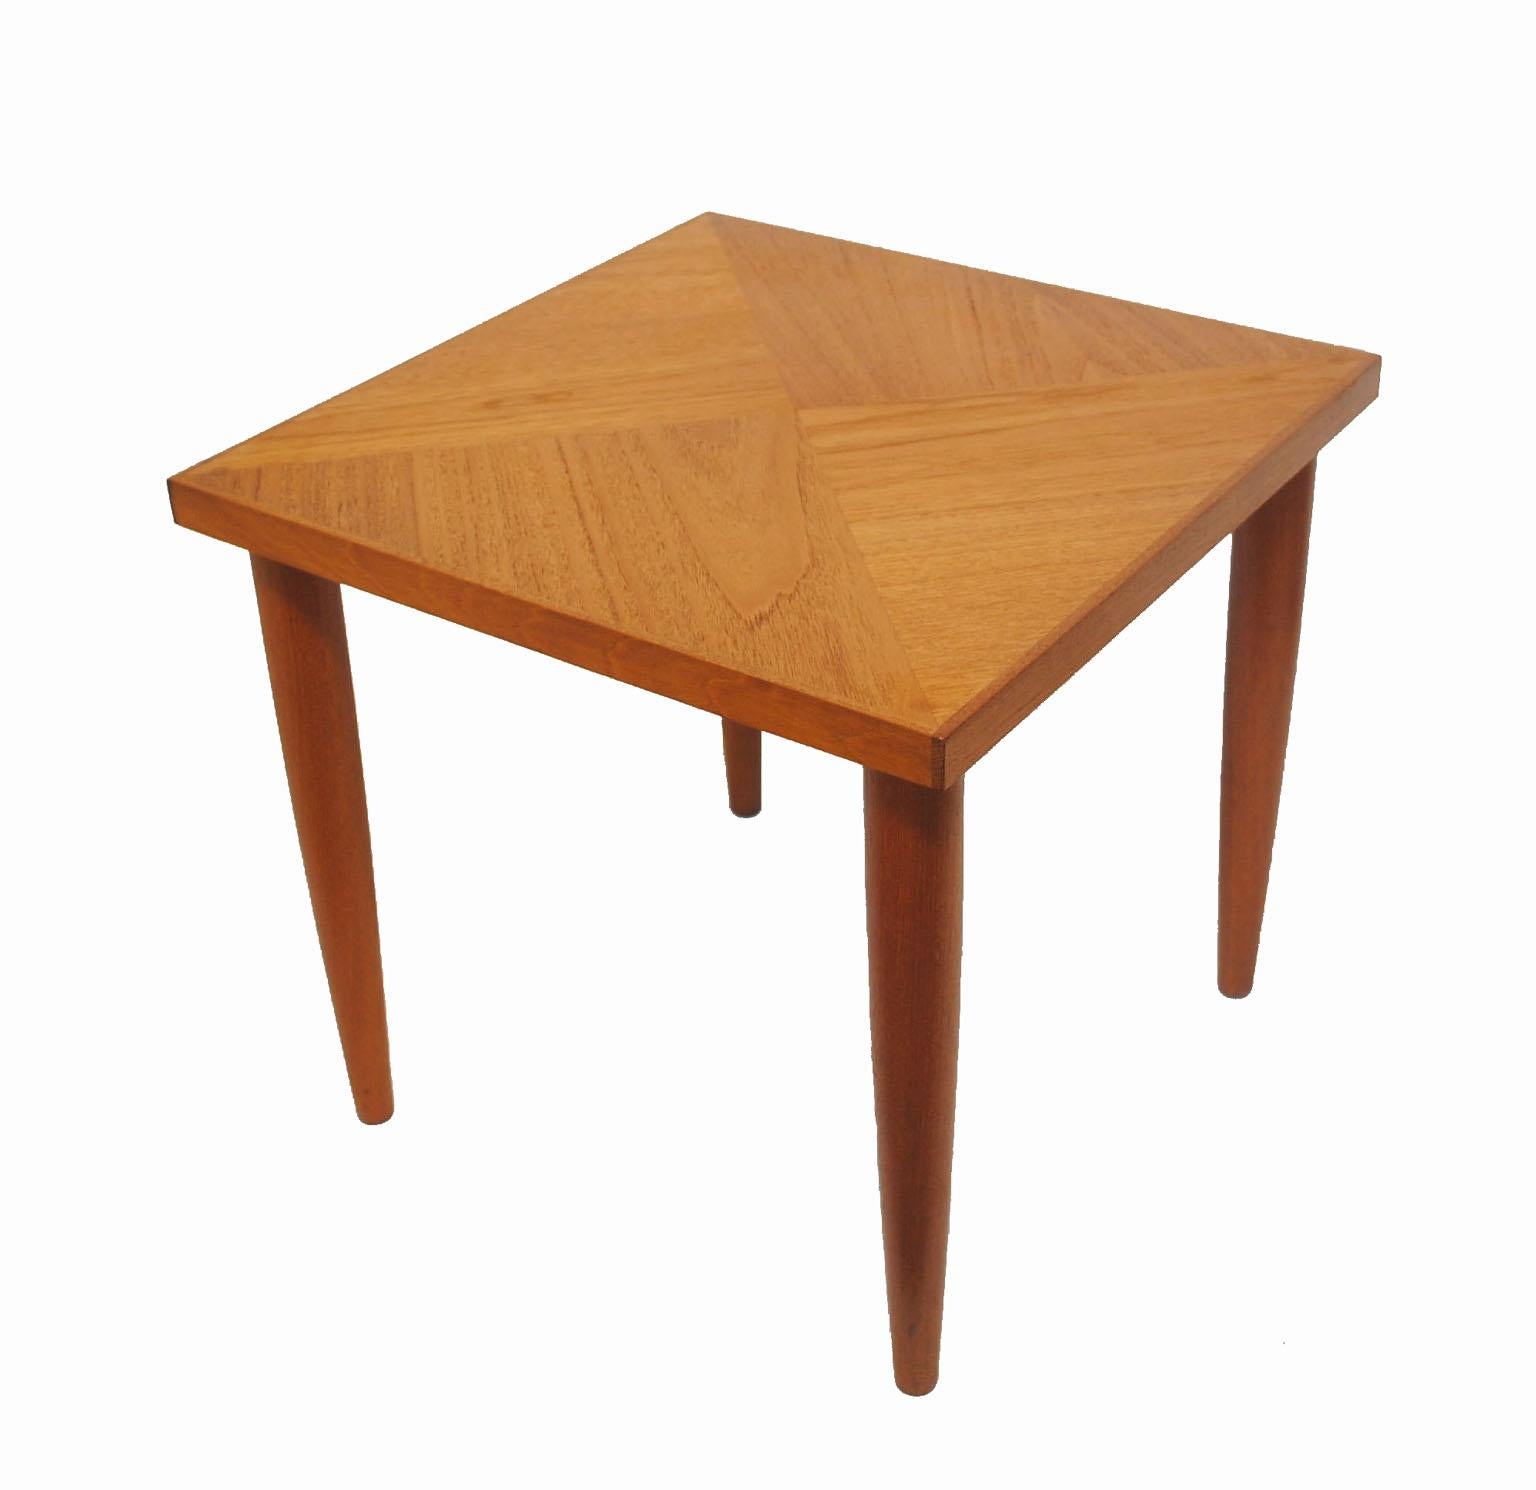 A gorgeous pair of teak occasional side tables from the 1950-1960s Mid-Century Modern era. Amazing Scandinavian Modern inspired craftsmanship throughout featuring a stylish cross-grained top and tapered conical legs. Pair is in overall excellent